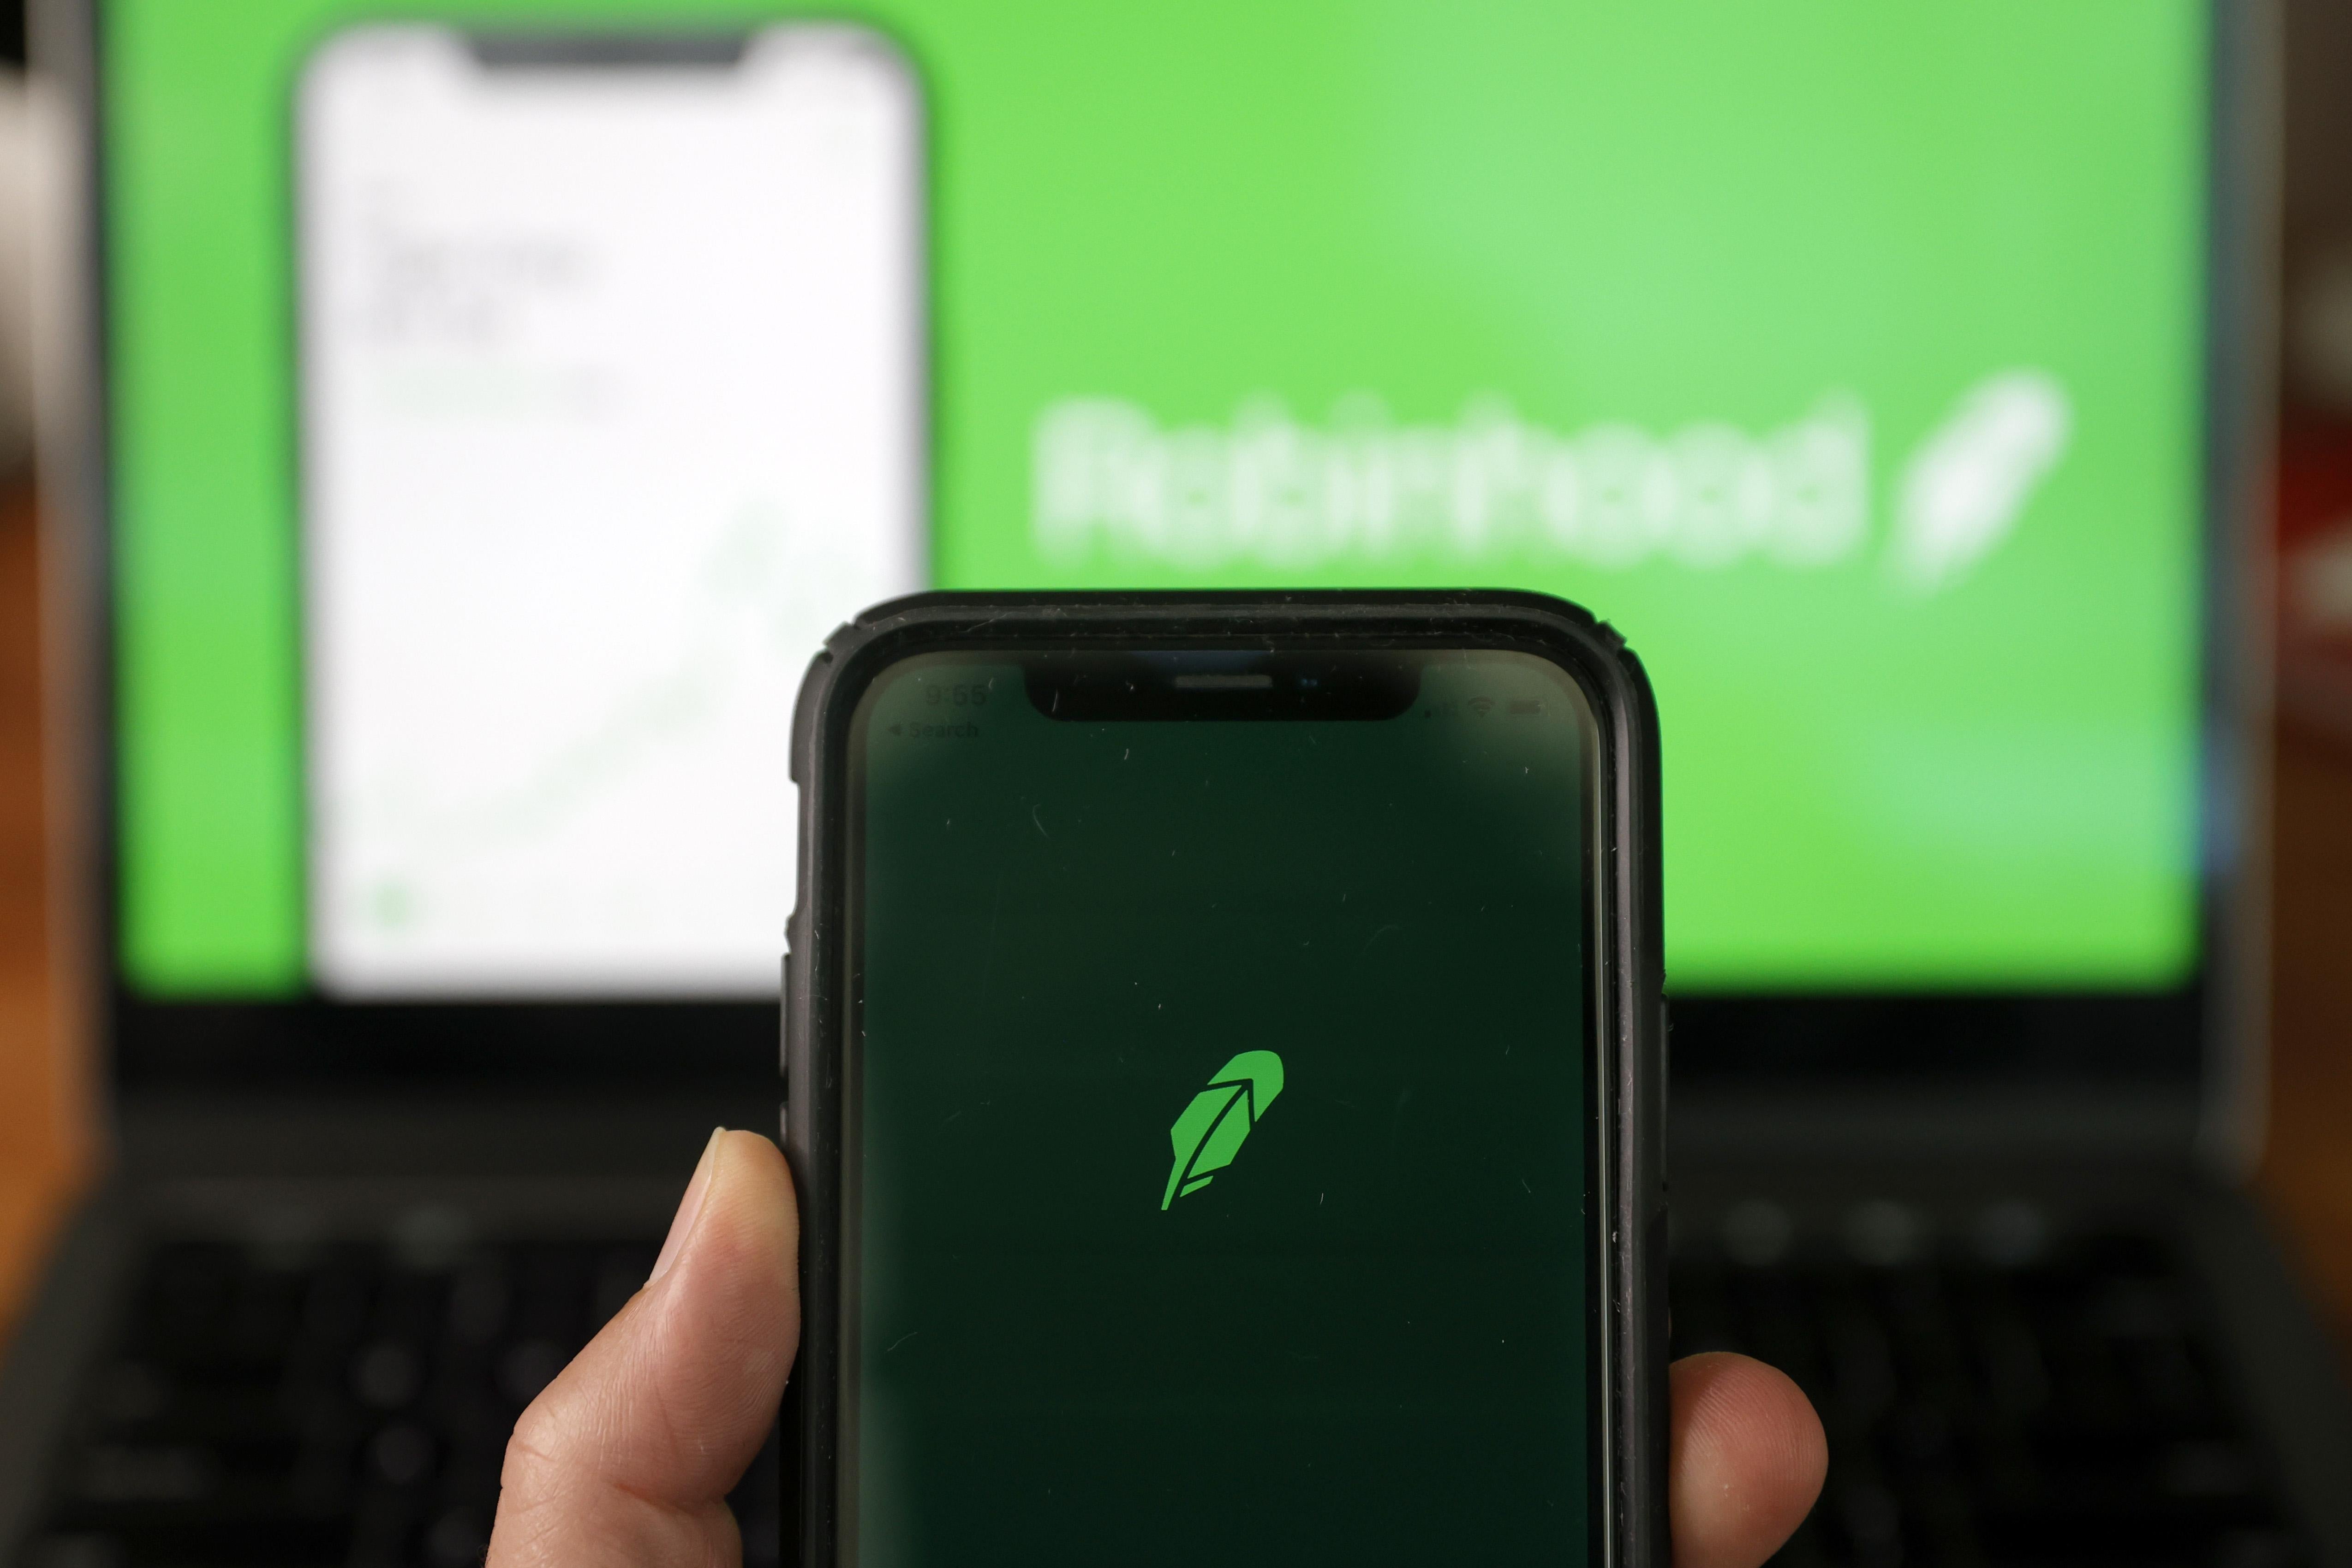 SAN ANSELMO, CALIFORNIA - DECEMBER 17: In this photo illustration, the Robinhood logo is displayed on an iPhone on December 17, 2020 in San Anselmo, California. The Securities and Exchange Commission has charged Silicon Valley start-up company Robinhood with deceiving customers about how the company makes money. The company has agreed to pay a $65 million civil penalty. (Photo Illustration by Justin Sullivan/Getty Images)